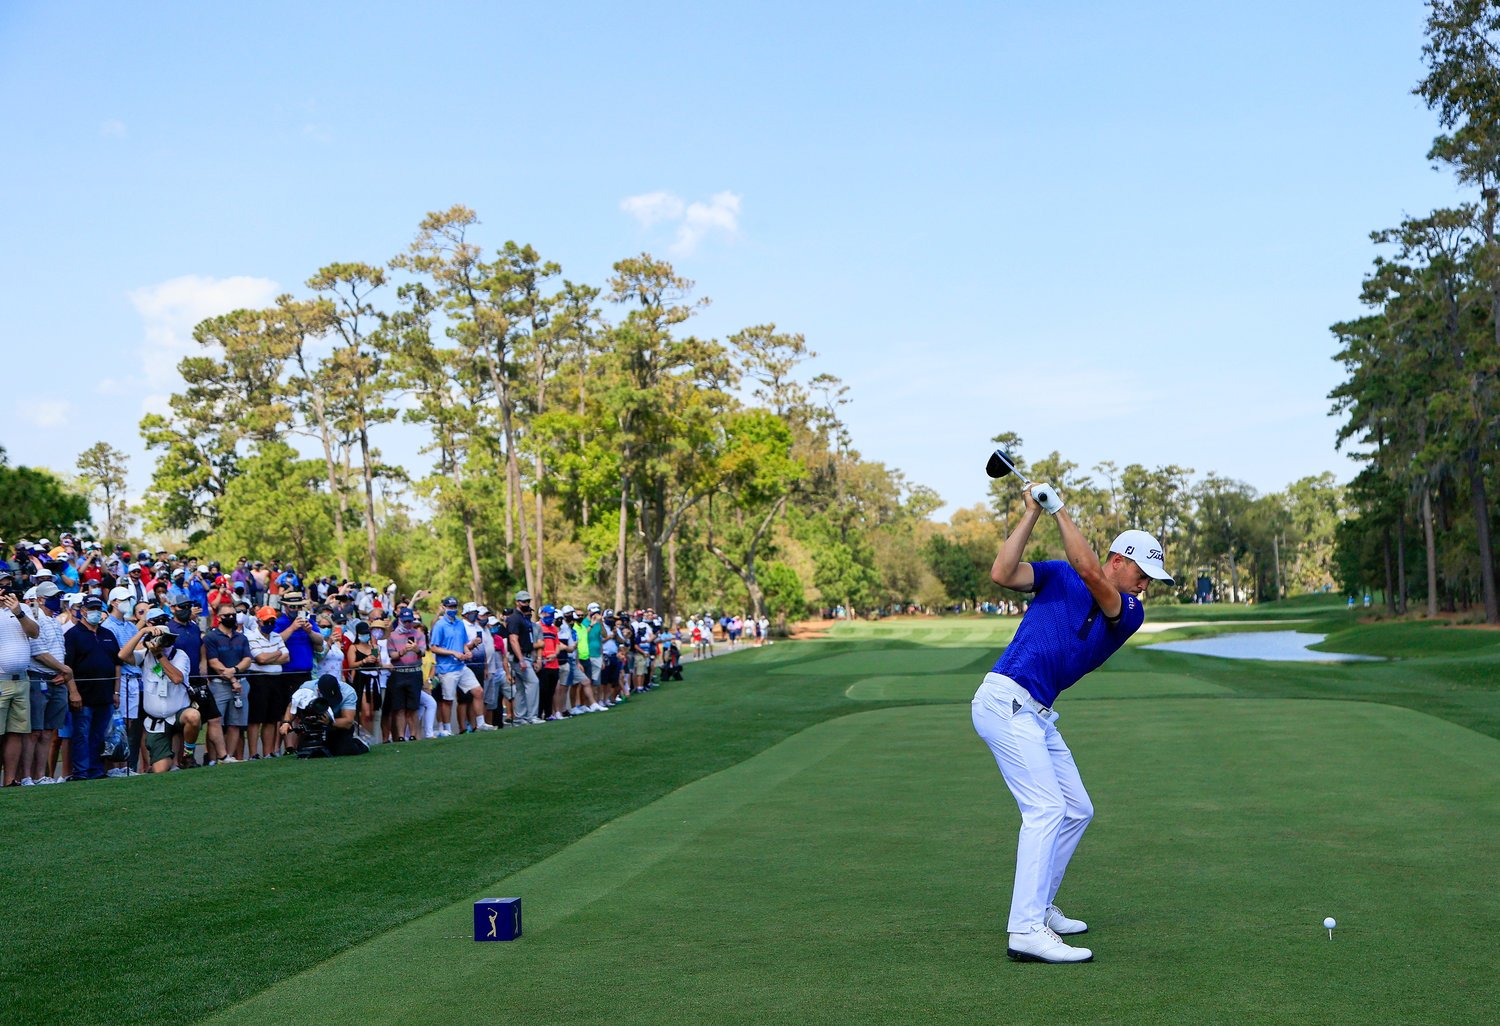 PONTE VEDRA BEACH, FLORIDA - MARCH 14: Justin Thomas of the United States plays his shot from the first tee during the final round of THE PLAYERS Championship on THE PLAYERS Stadium Course at TPC Sawgrass on March 14, 2021 in Ponte Vedra Beach, Florida. (Photo by Sam Greenwood/Getty Images)